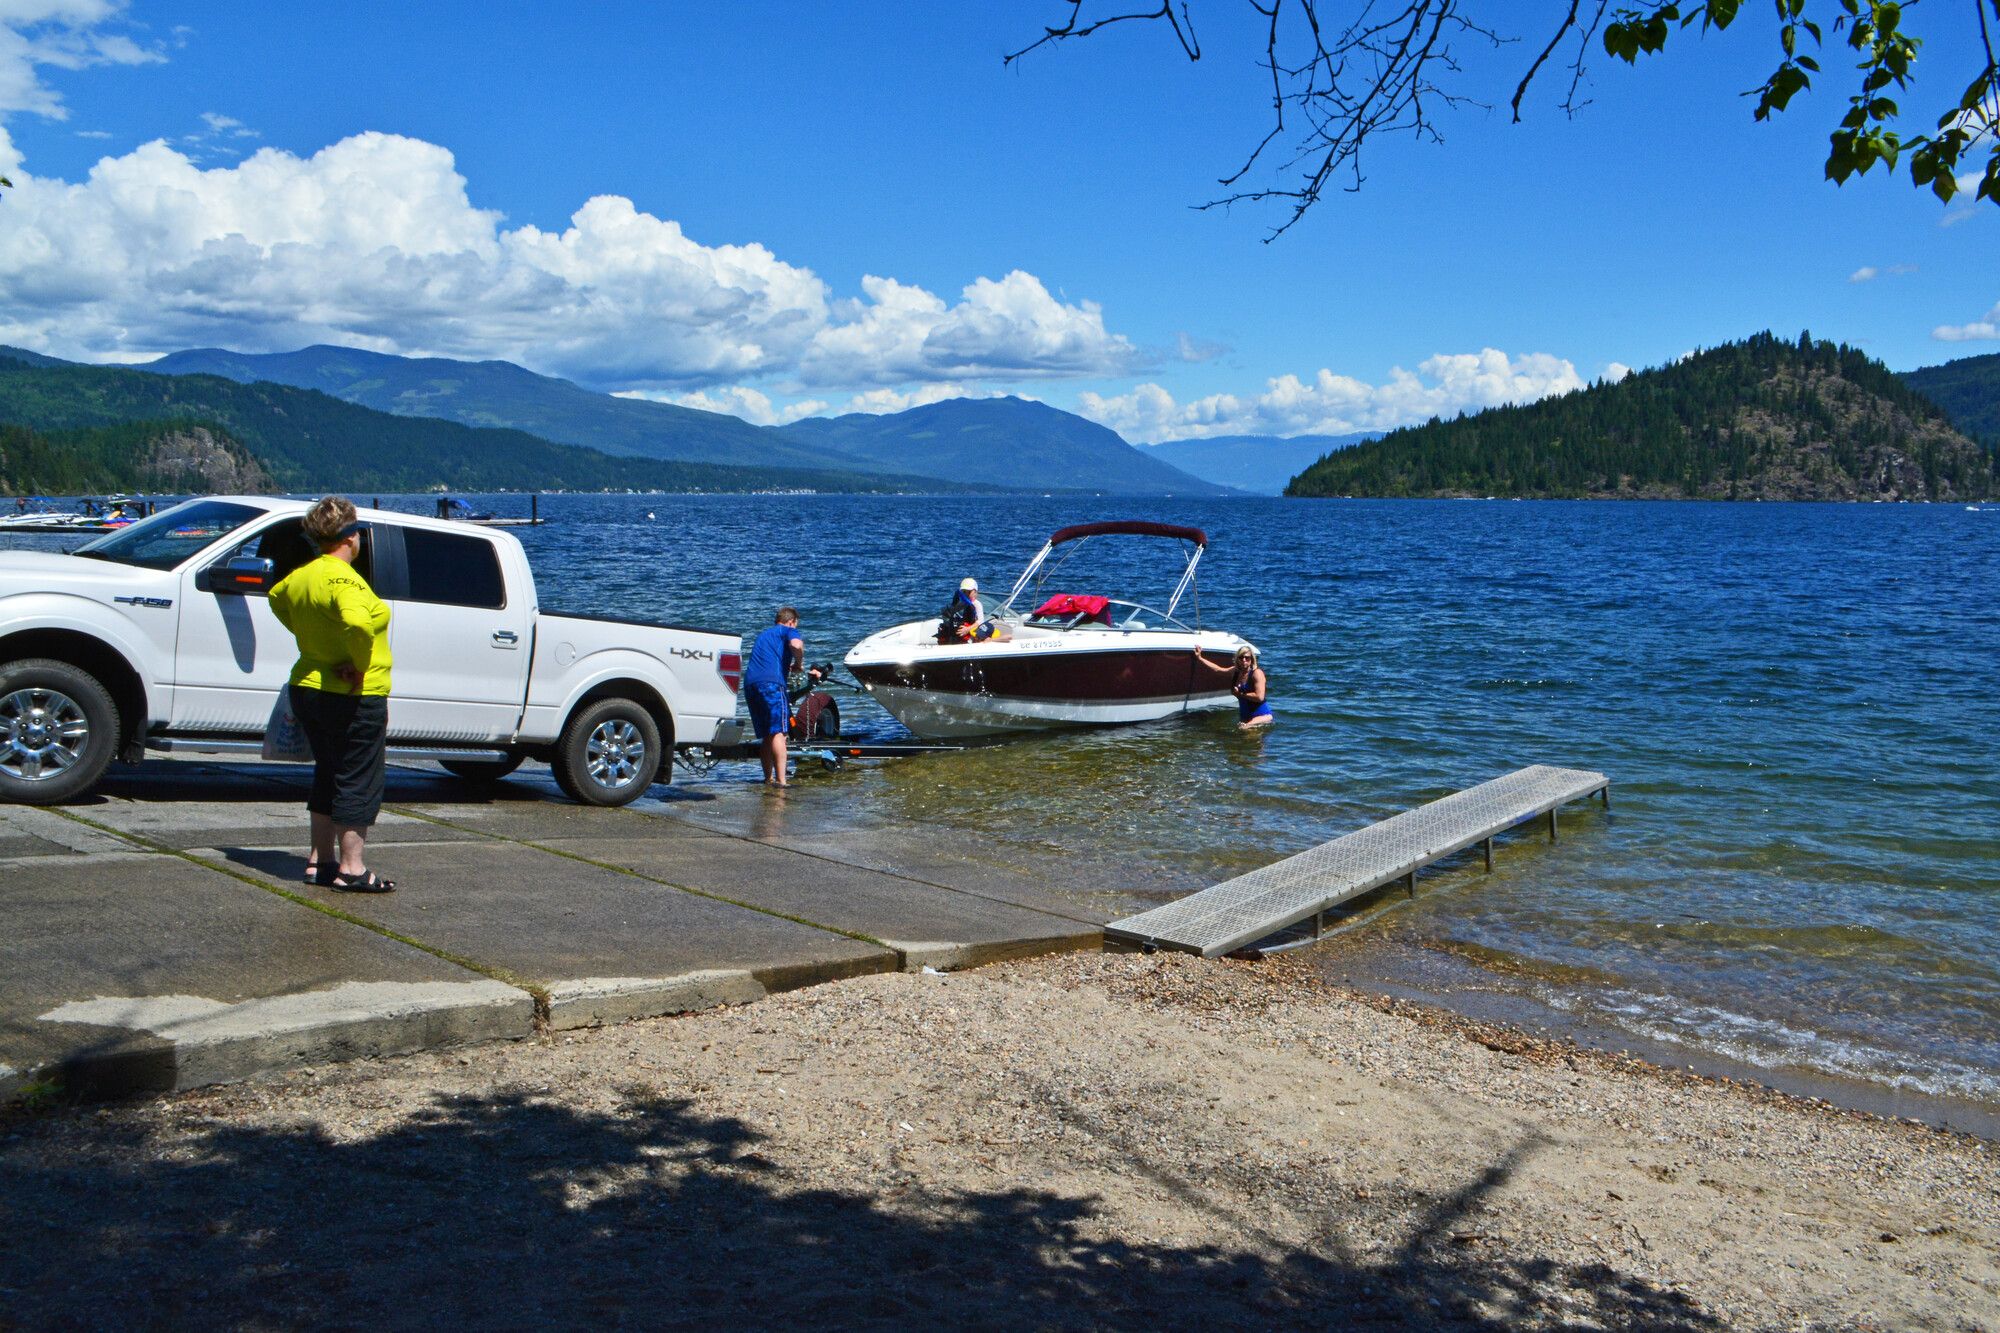 Park visitors launching a boat from the double-wide boat launch at Shuswap Lake Park.